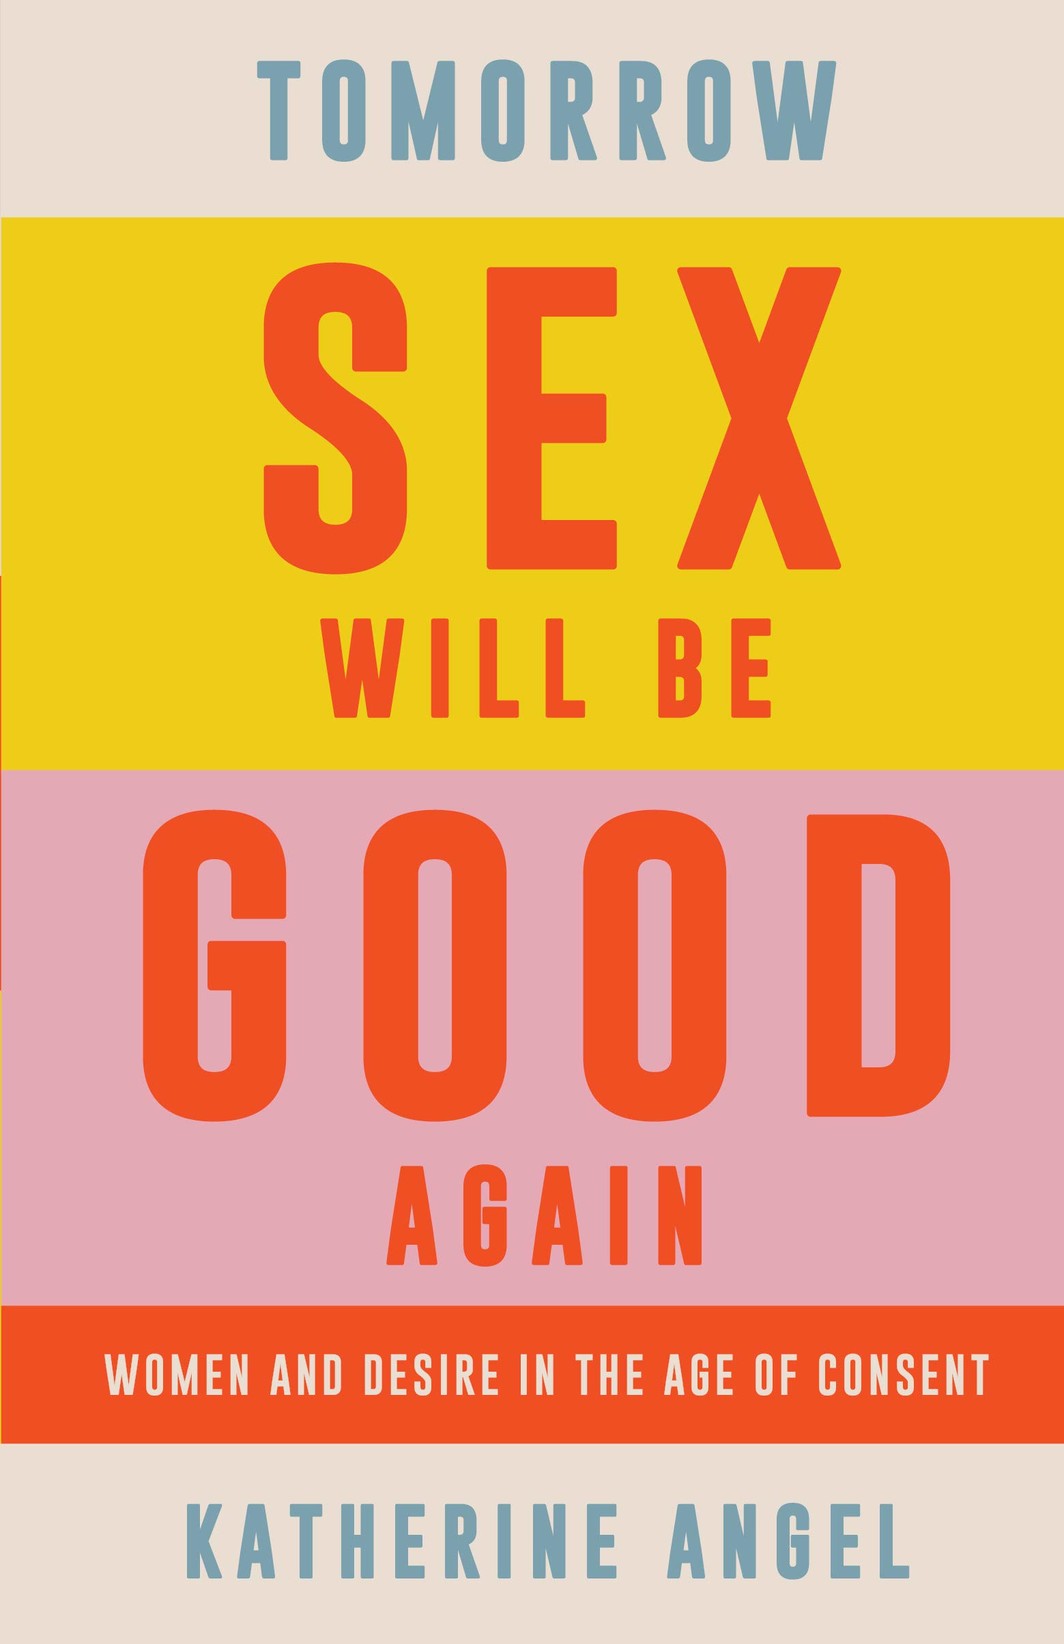 The cover of Tomorrow Sex Will Be Good Again: Women and Desire in the Age of Consent